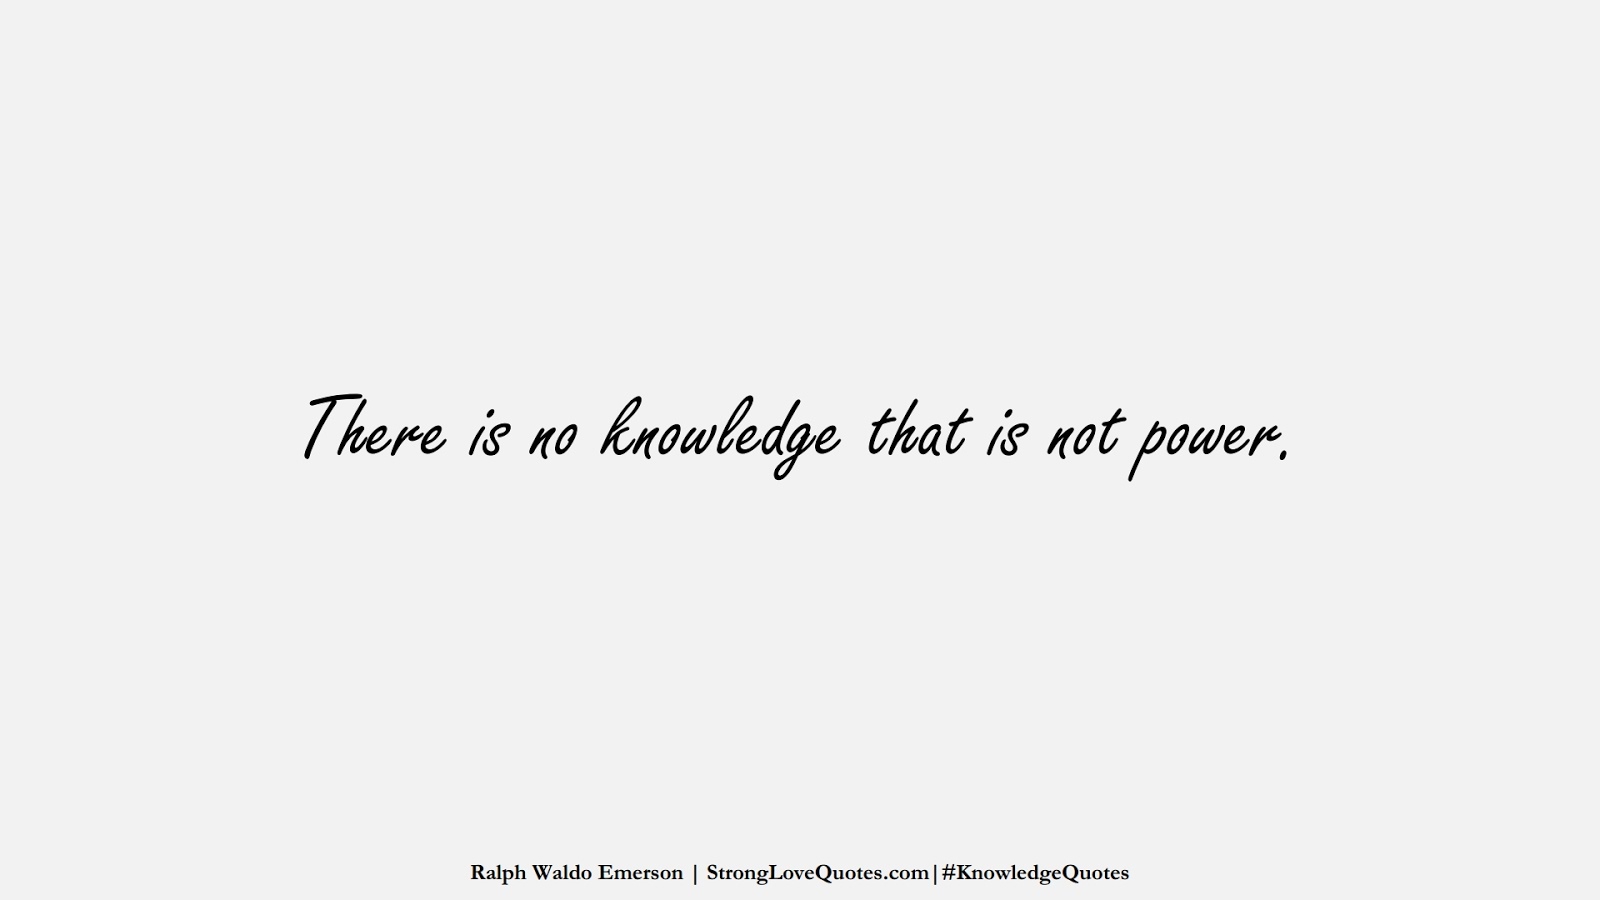 There is no knowledge that is not power. (Ralph Waldo Emerson);  #KnowledgeQuotes